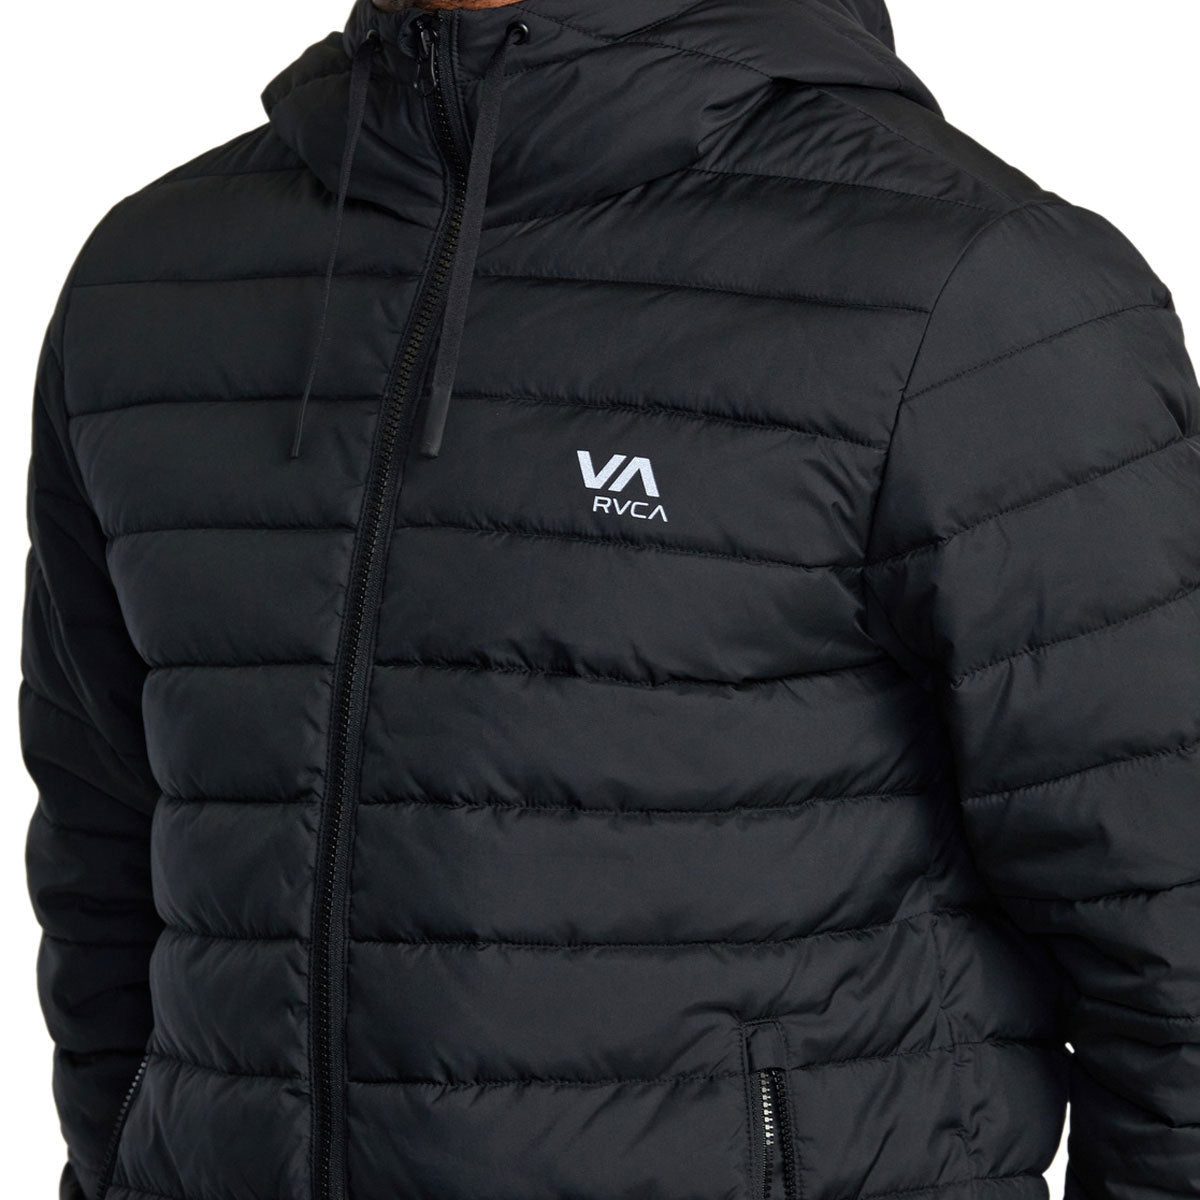 RVCA Packable Puffa Hooded Jacket - Black image 3